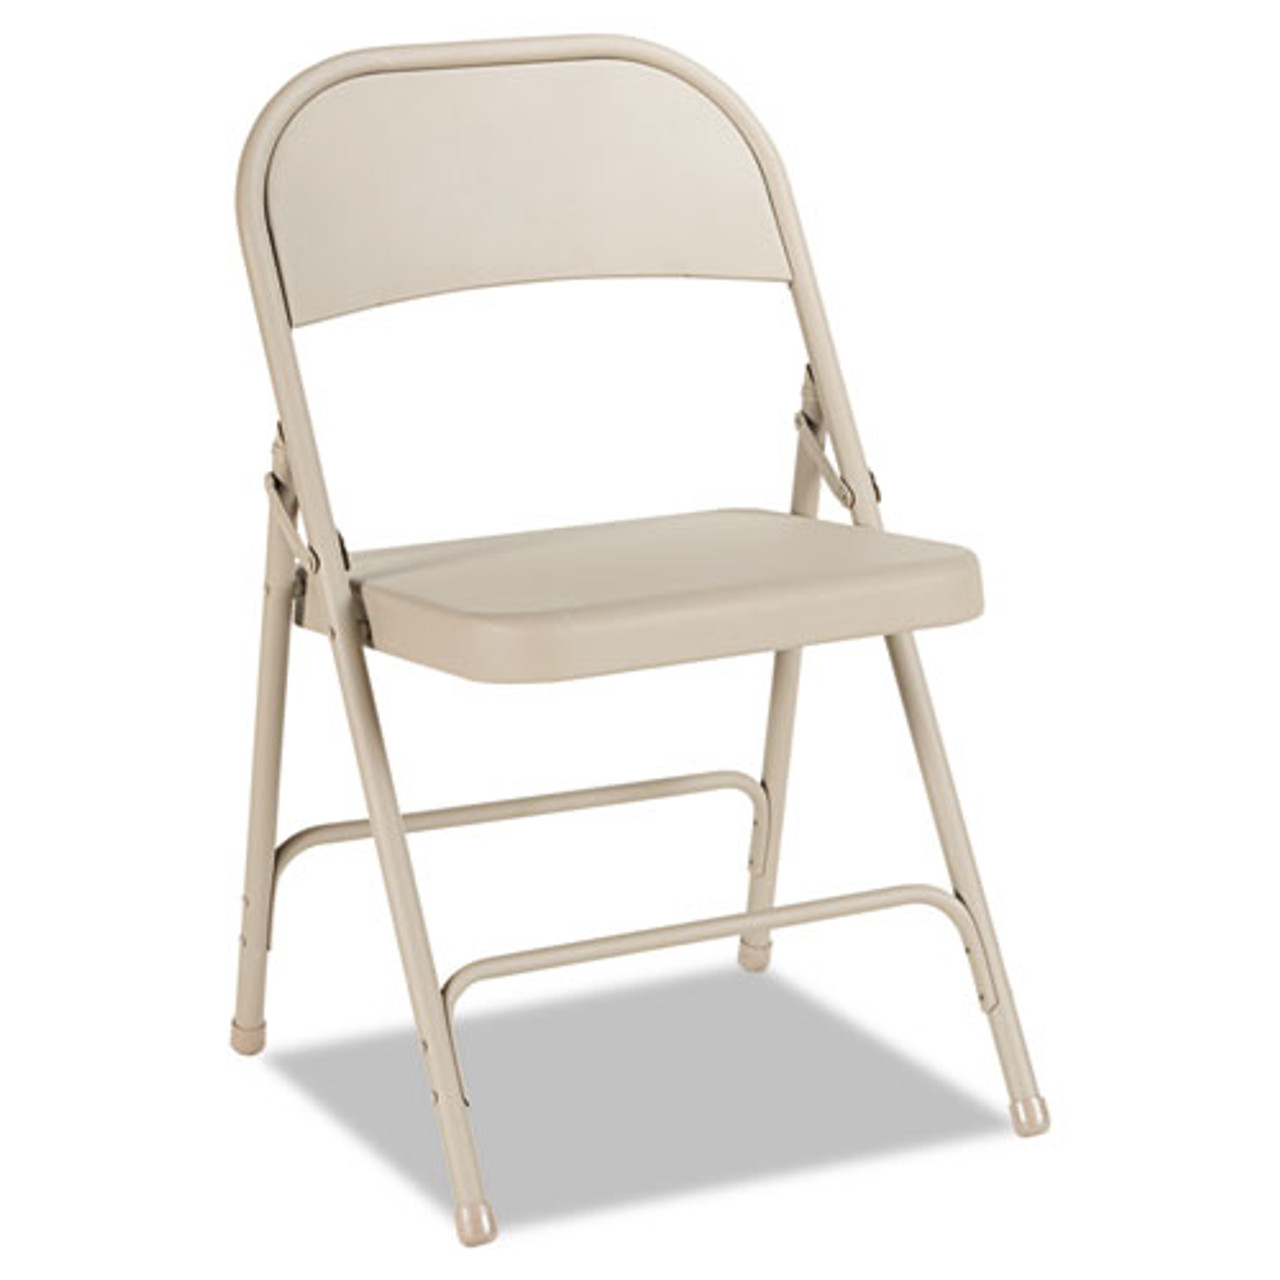 Steel Folding Chair With Two-Brace Support, Tan, 4/carton, #AL-1239